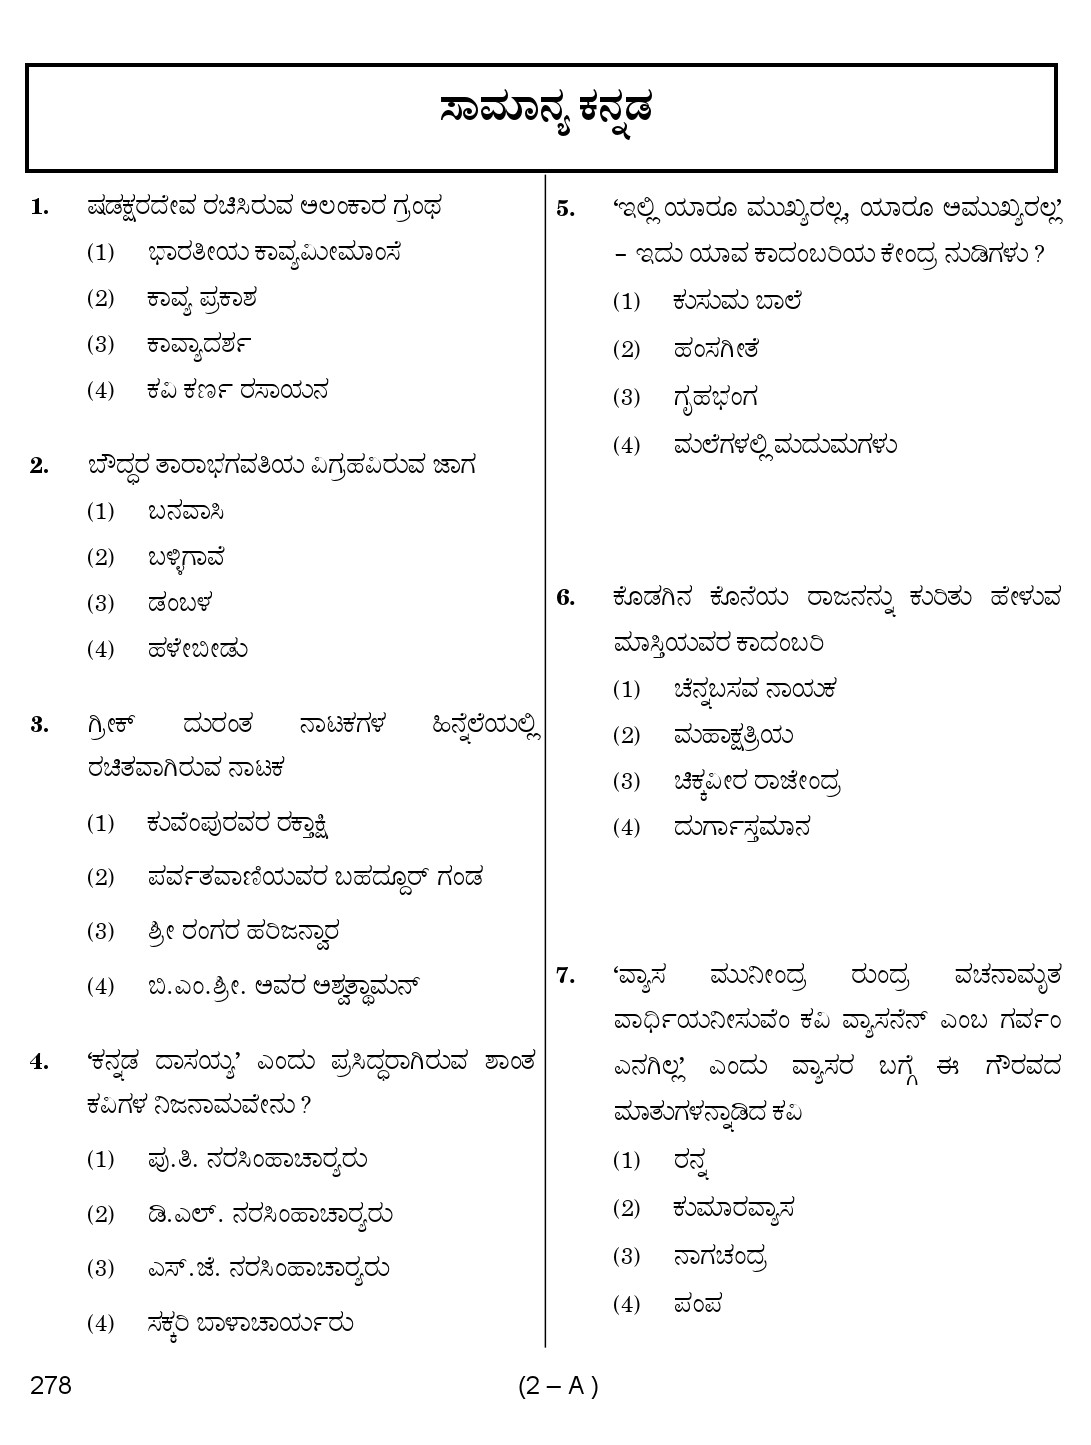 Karnataka PSC First Division Computer Assistants Exam Sample Question Paper 278 2